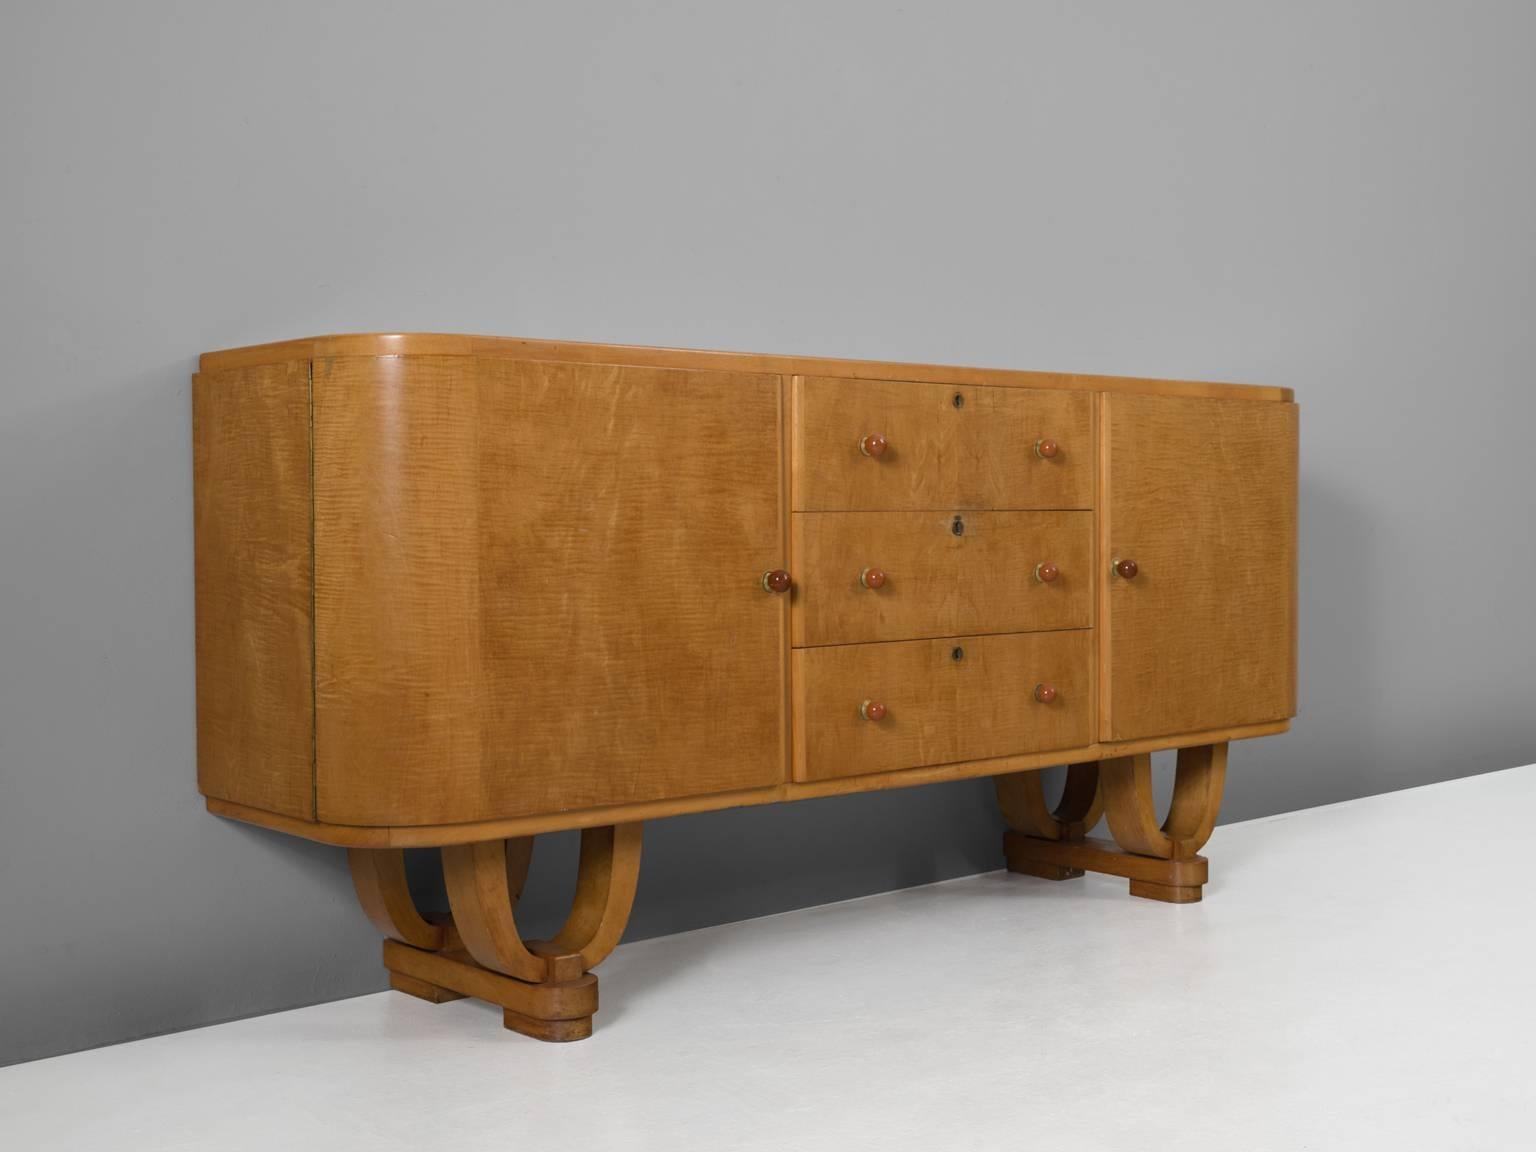 Credenza, in maple and mahogany, Belgium, 1930s.

Very elegant Art Deco credenza. Most remarkable are the legs of this cabinet. Two large U-shaped legs are combined on a rectangular base. The legs are nicely layered and create an floating